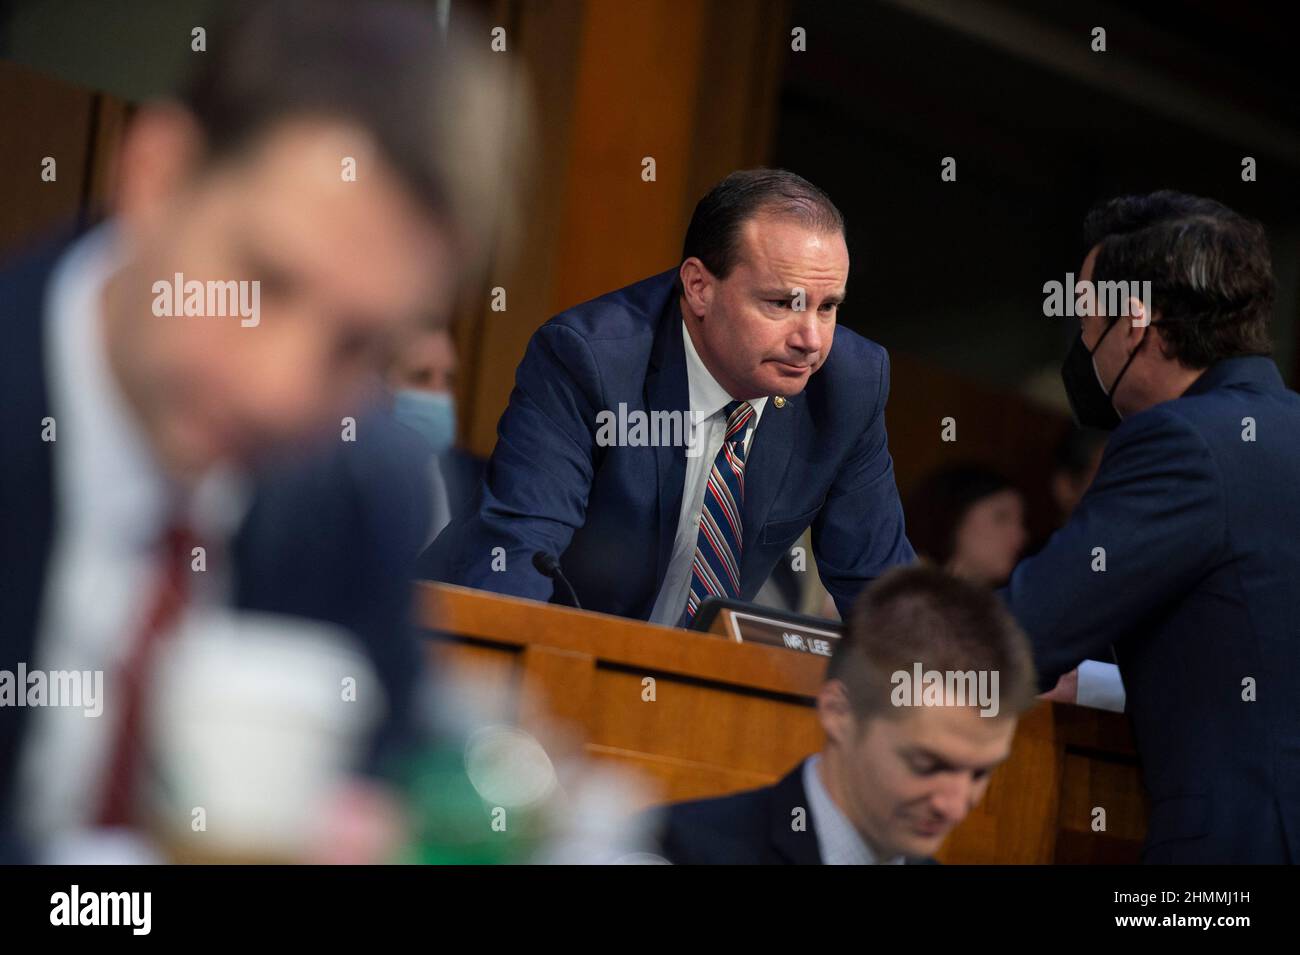 Sen. Mike Lee, R-UT, and Sen. Jon Ossoff, D-GA, speak during a Senate Judiciary executive business meeting at the US Capitol in Washington, DC, USA on Thursday, February 10, 2022. Photo by Bonnie Cash/CNP/ABACAPRESS.COM Stock Photo